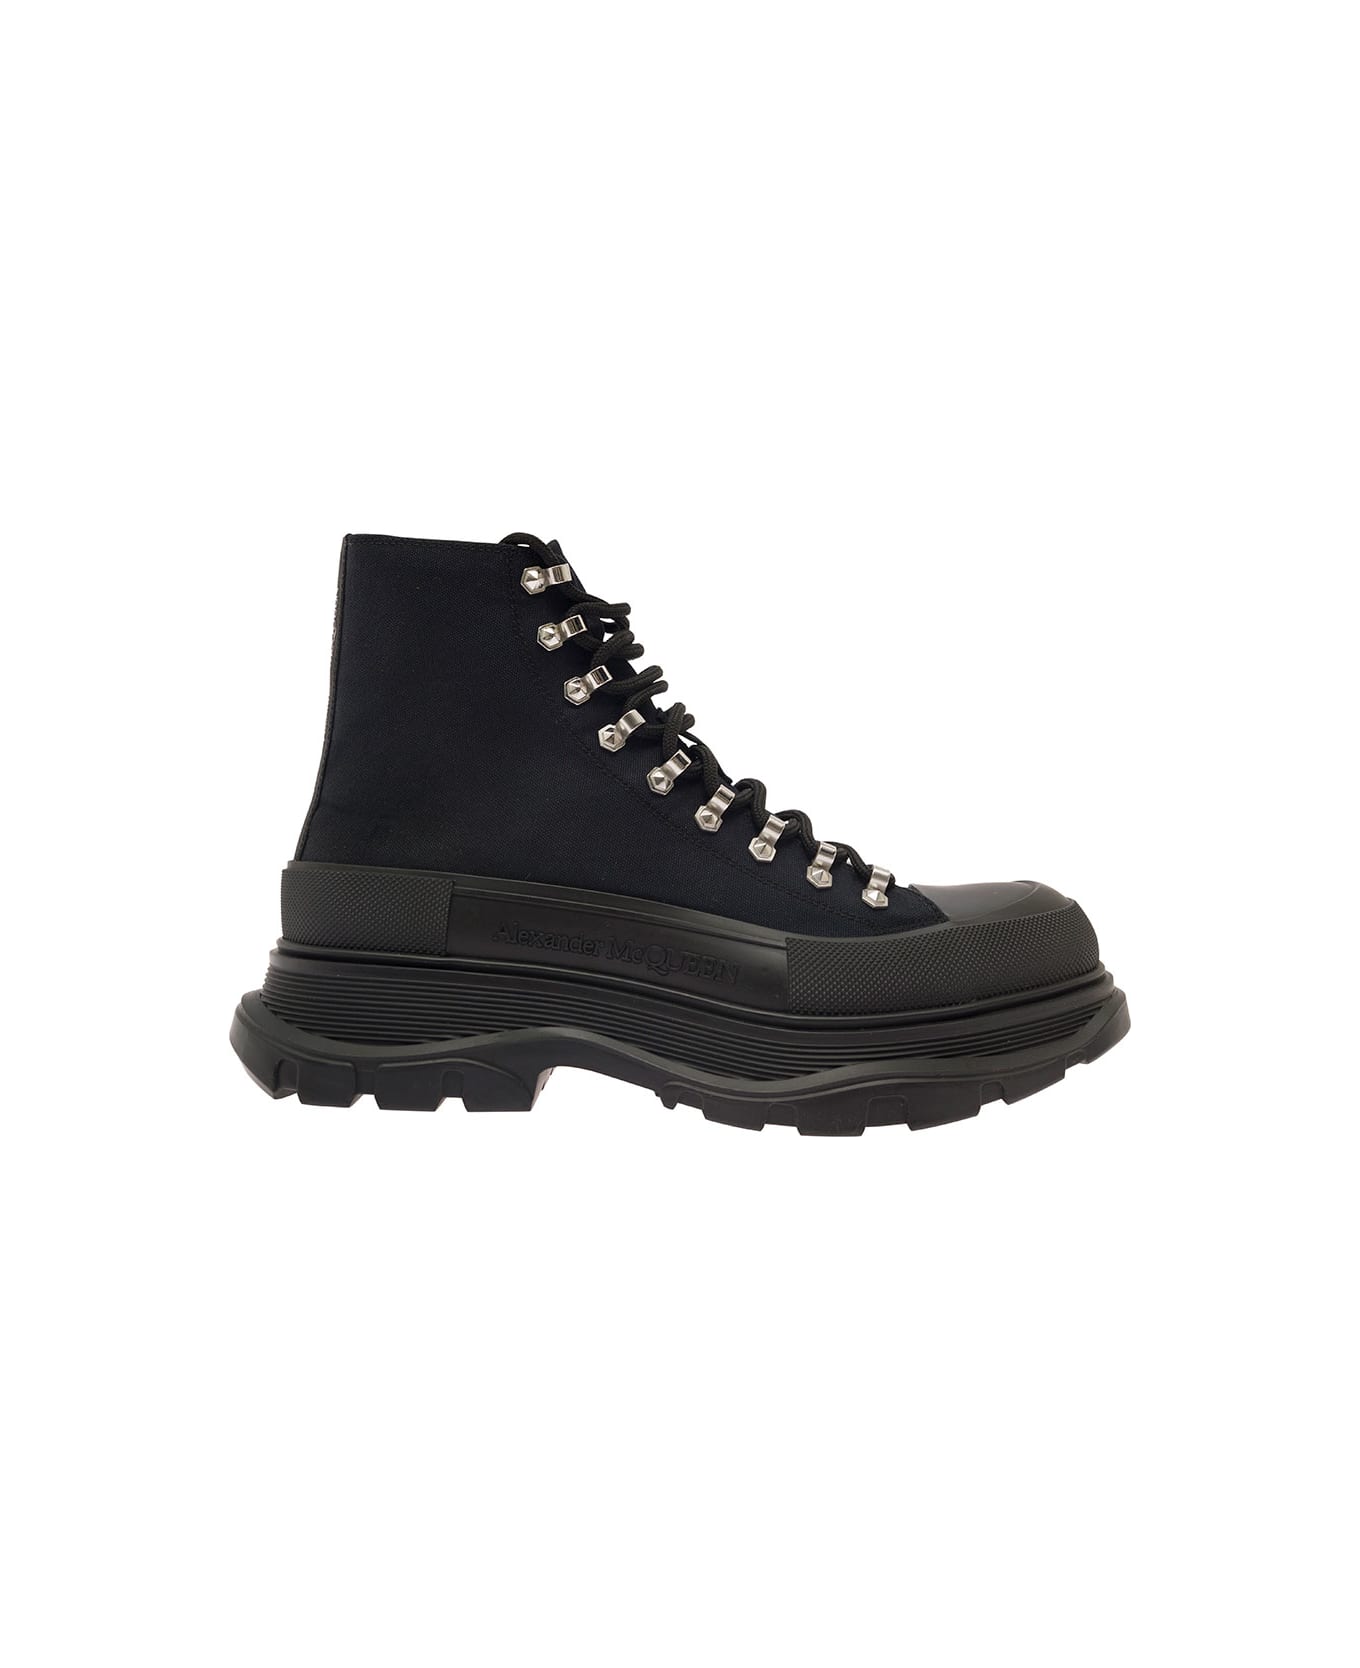 Alexander McQueen 'trade Slick' Black Lace-up Boots With Thread Sole In Canvas Man - Black